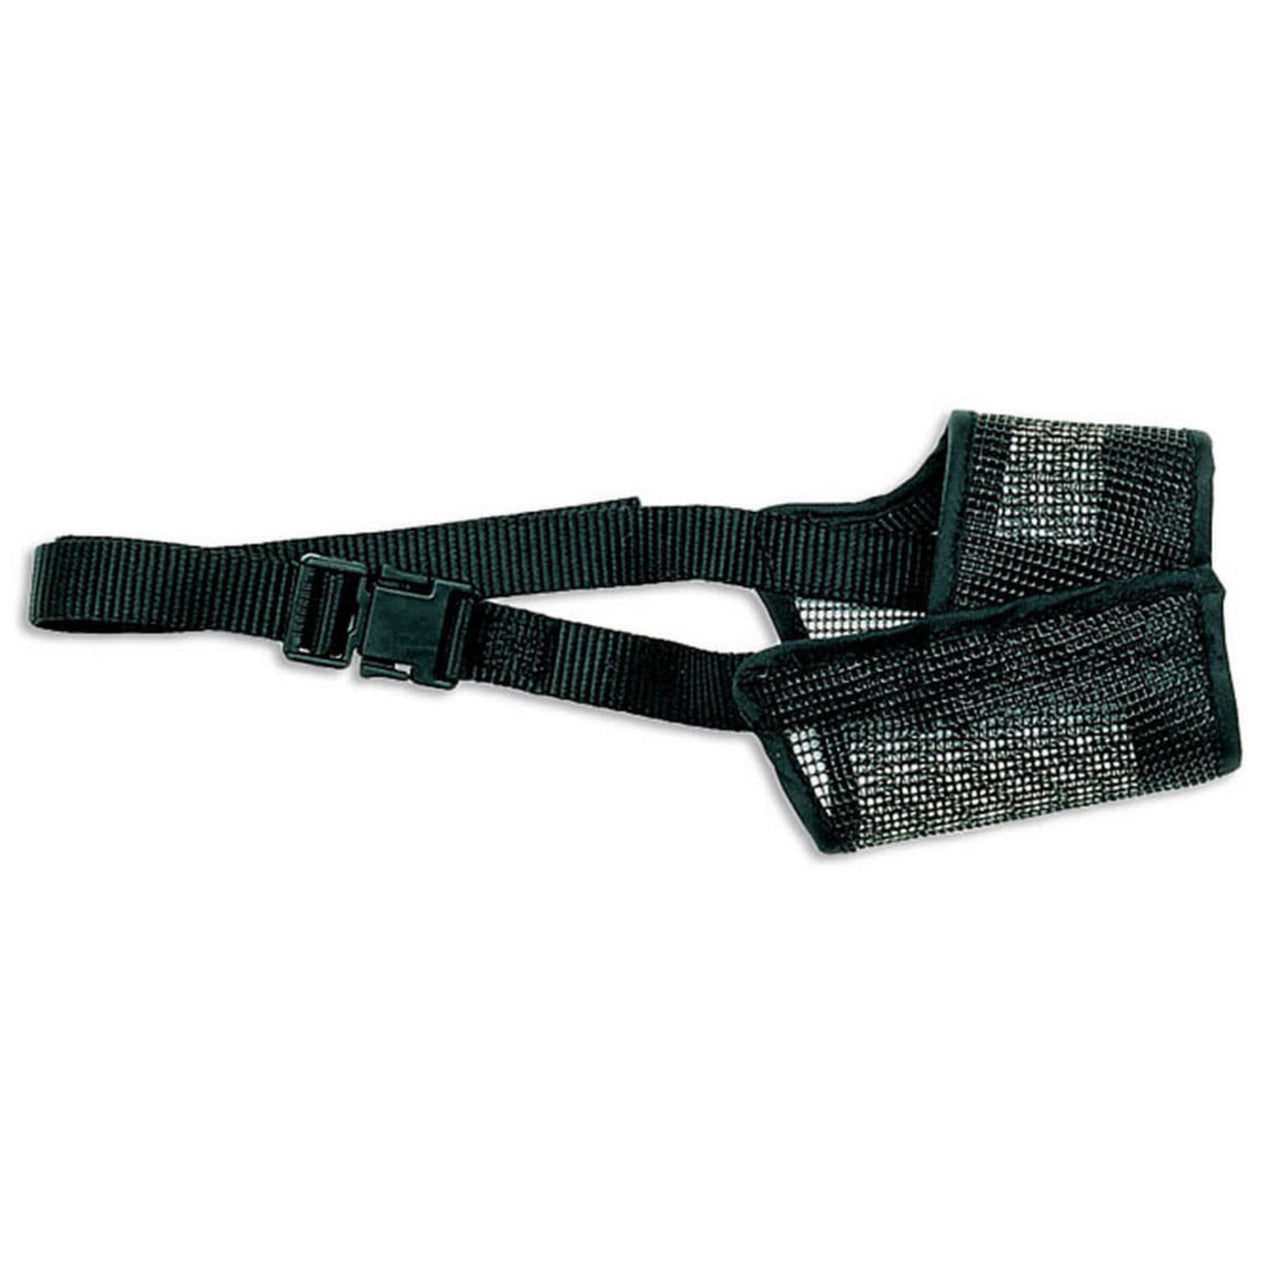 Best Fit Adjustable Mesh Dog Muzzle 9.5 in